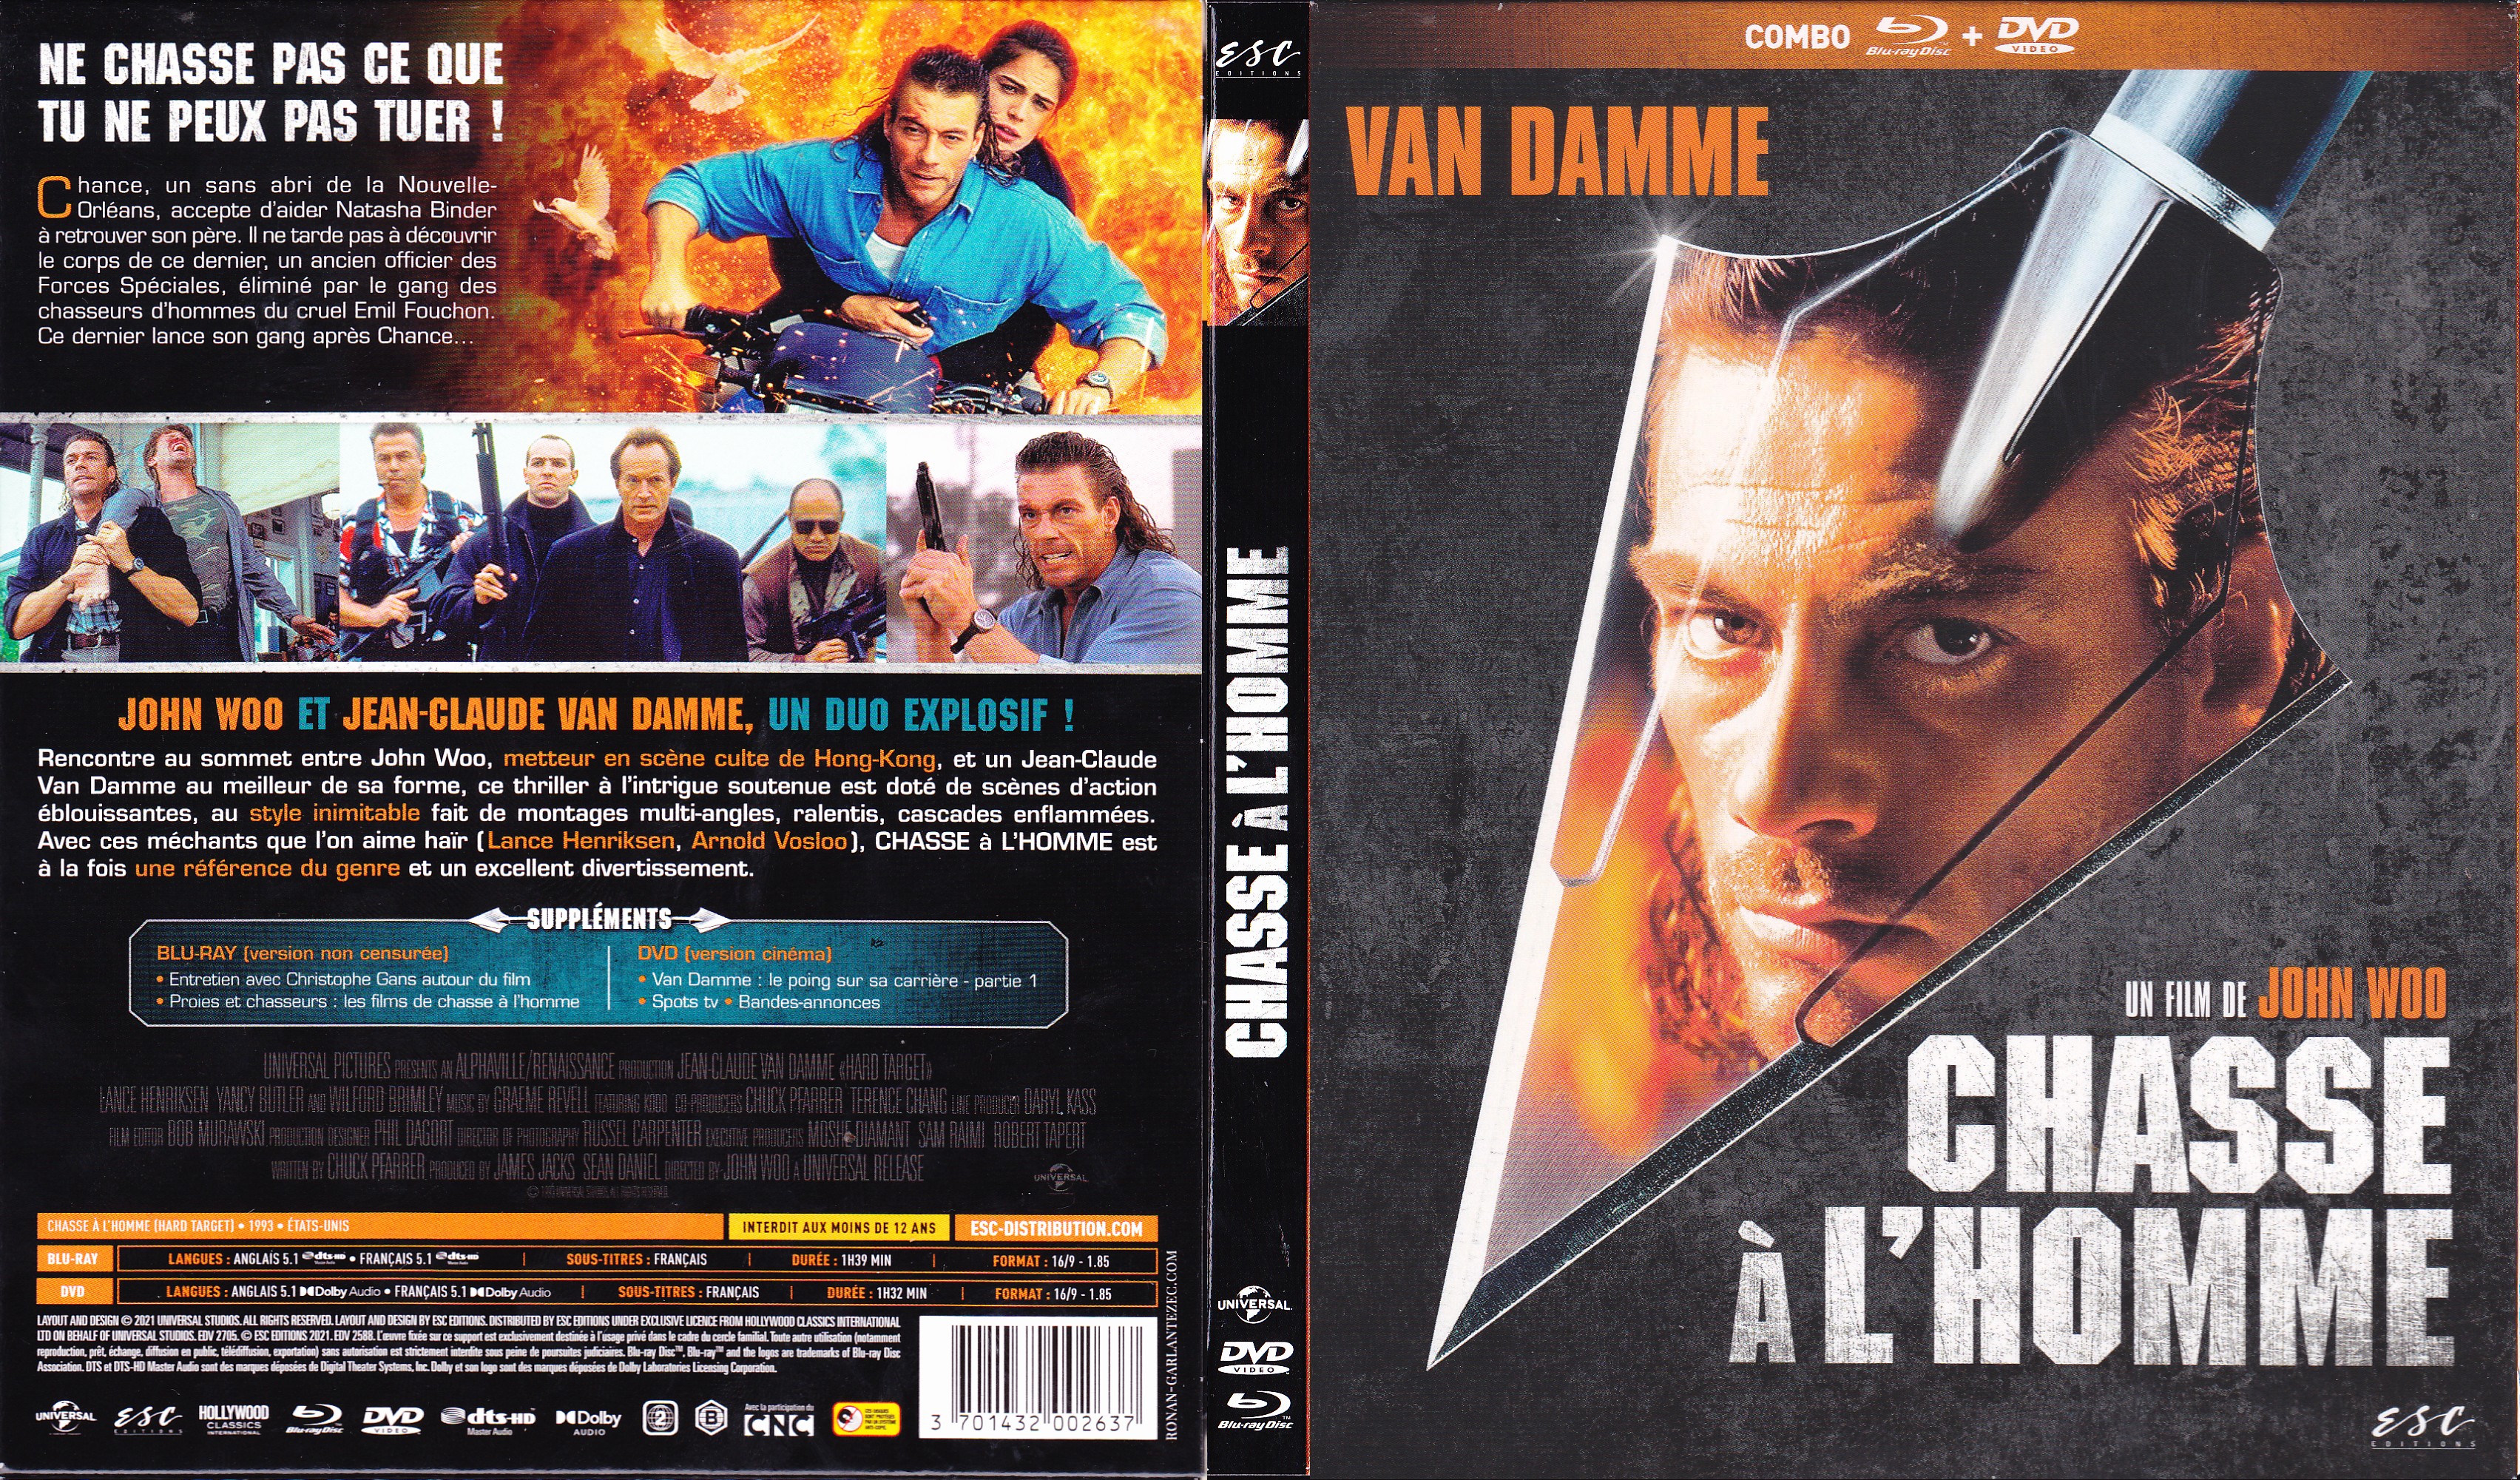 Jaquette DVD Chasse  l